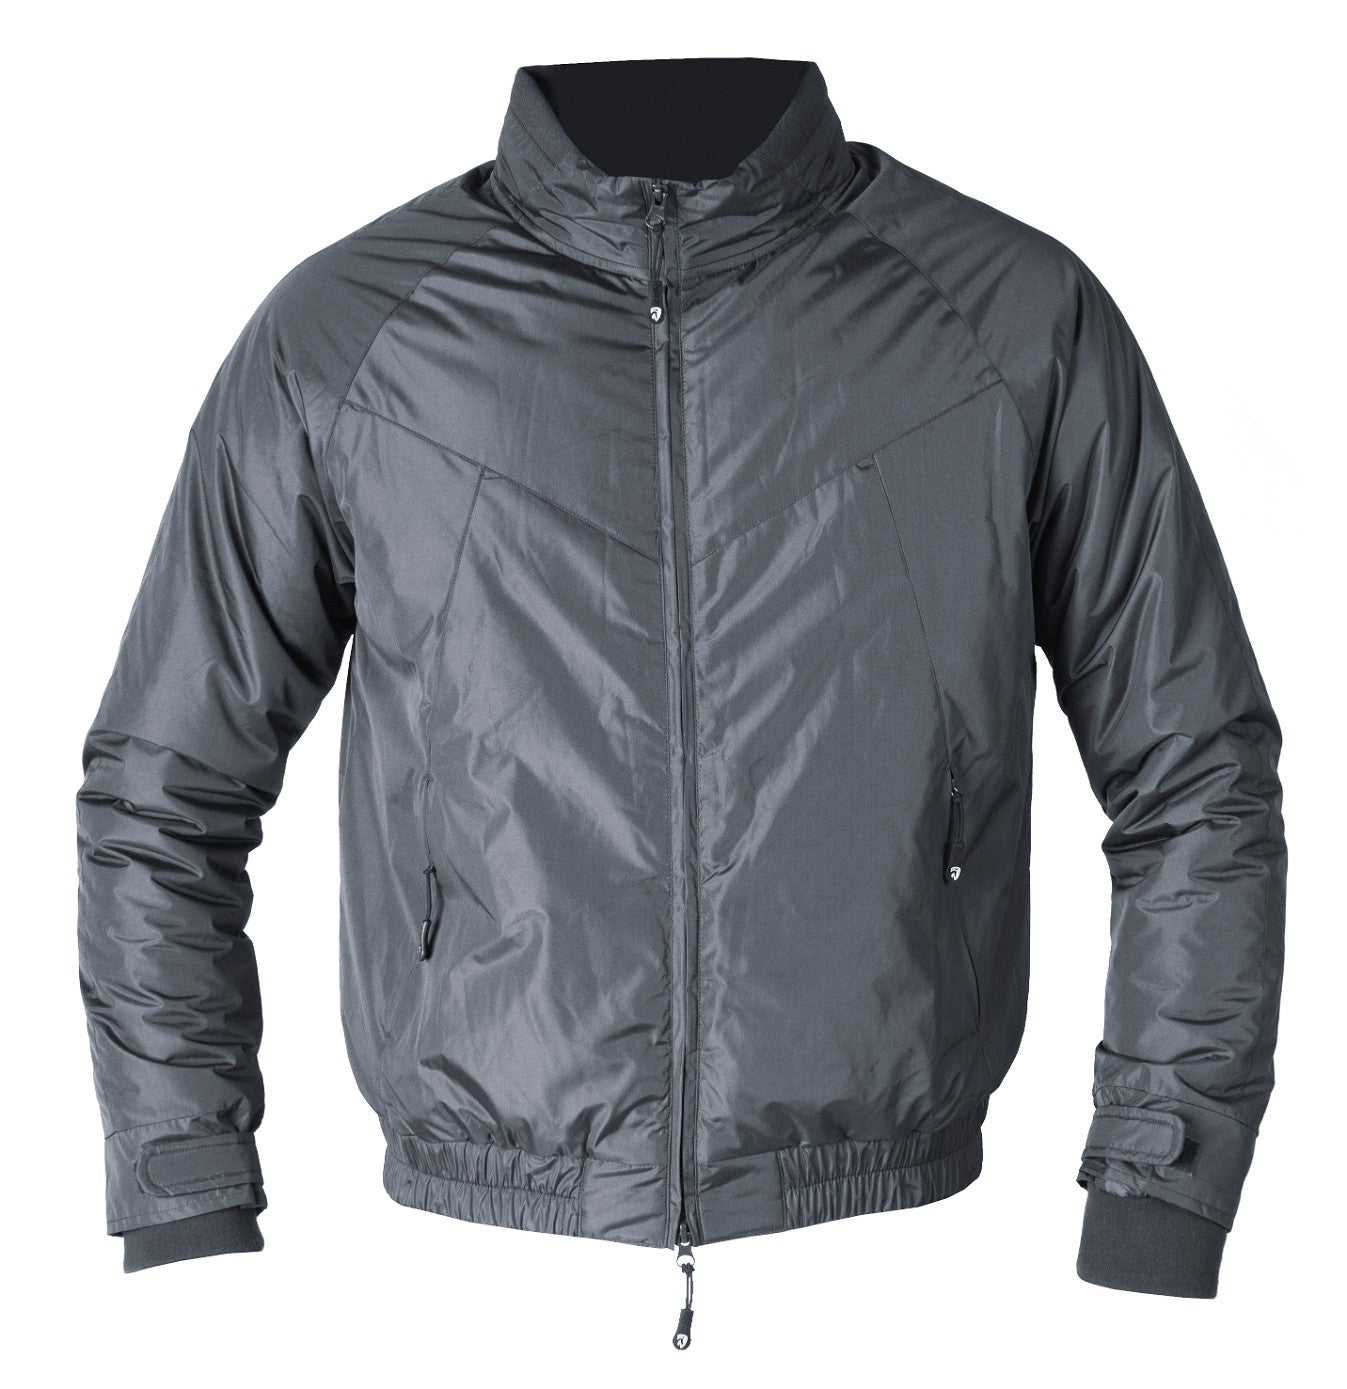 Horka Bomber Style Tension Jacket - Top Of The Clops